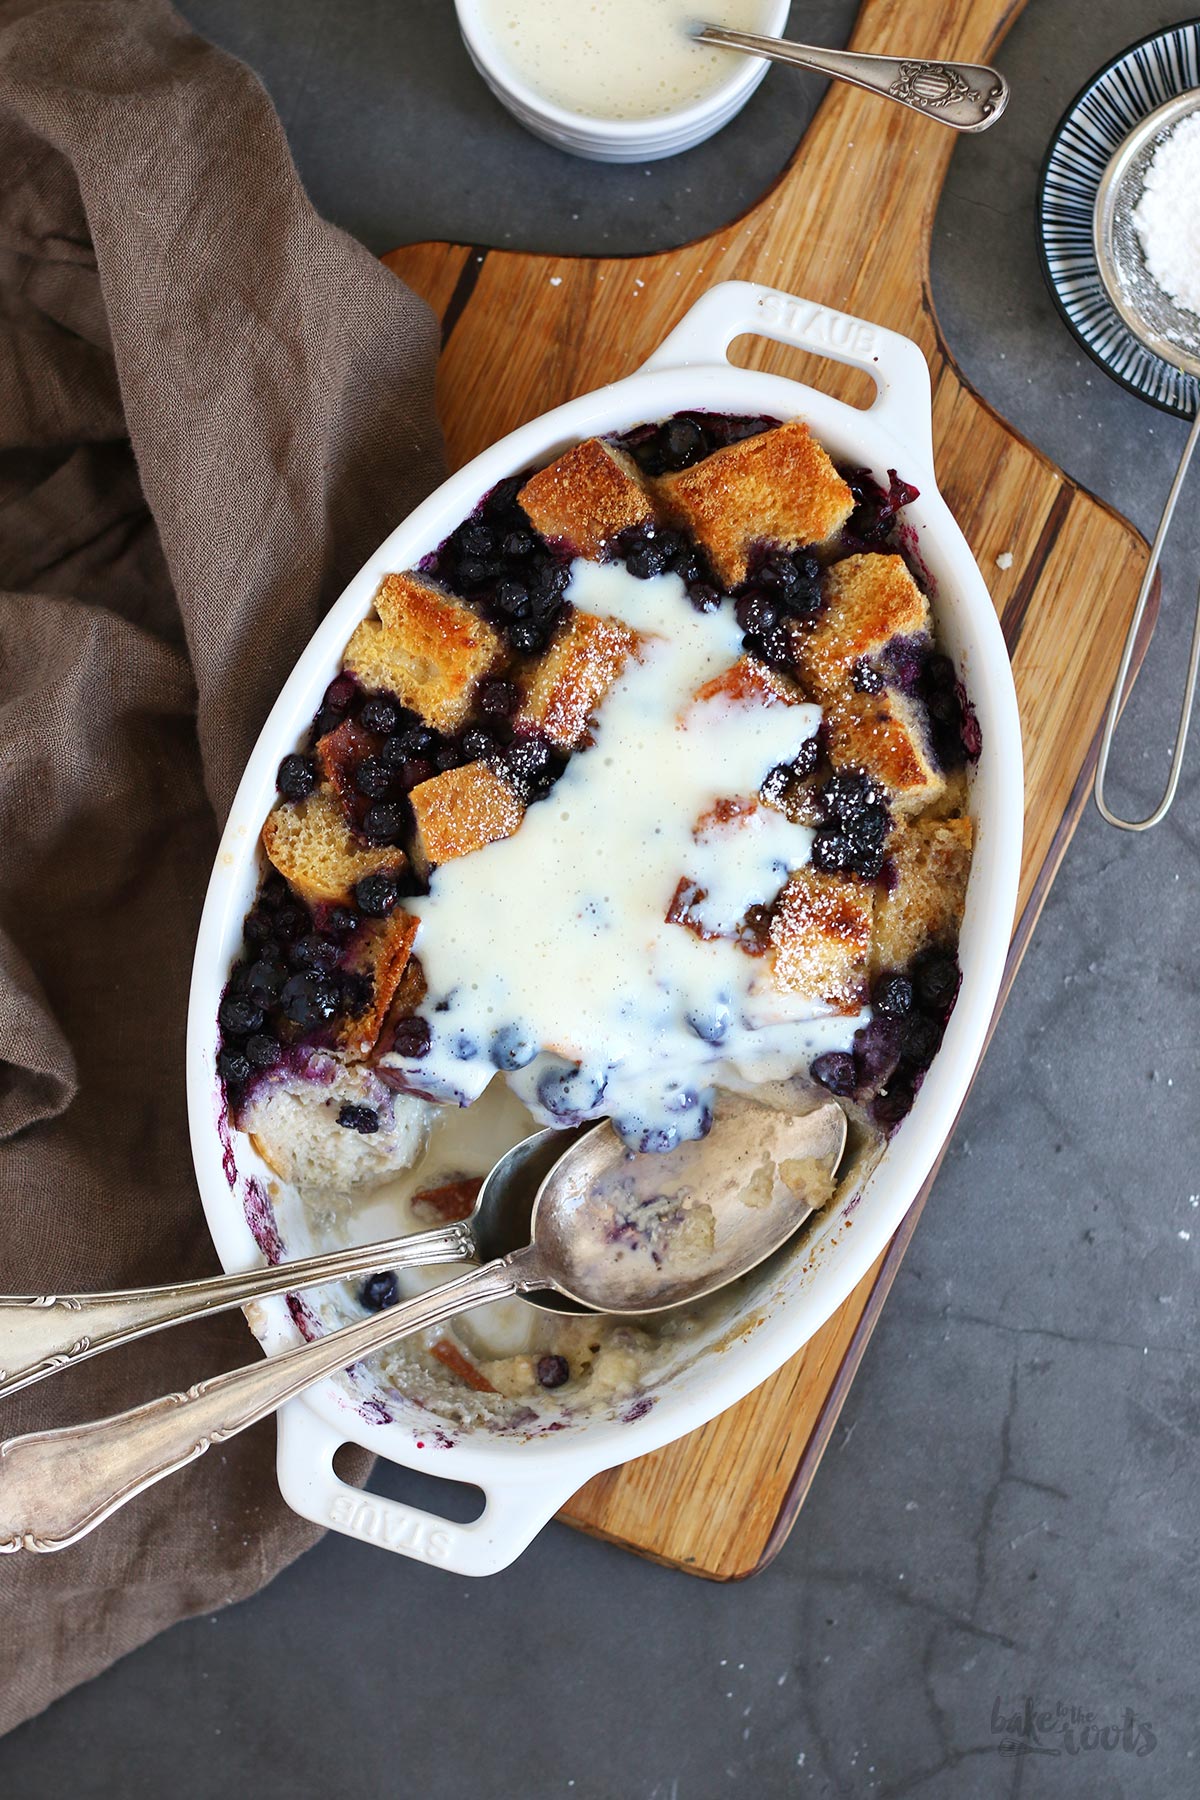 Bread Pudding with Blueberries | Bake to the roots